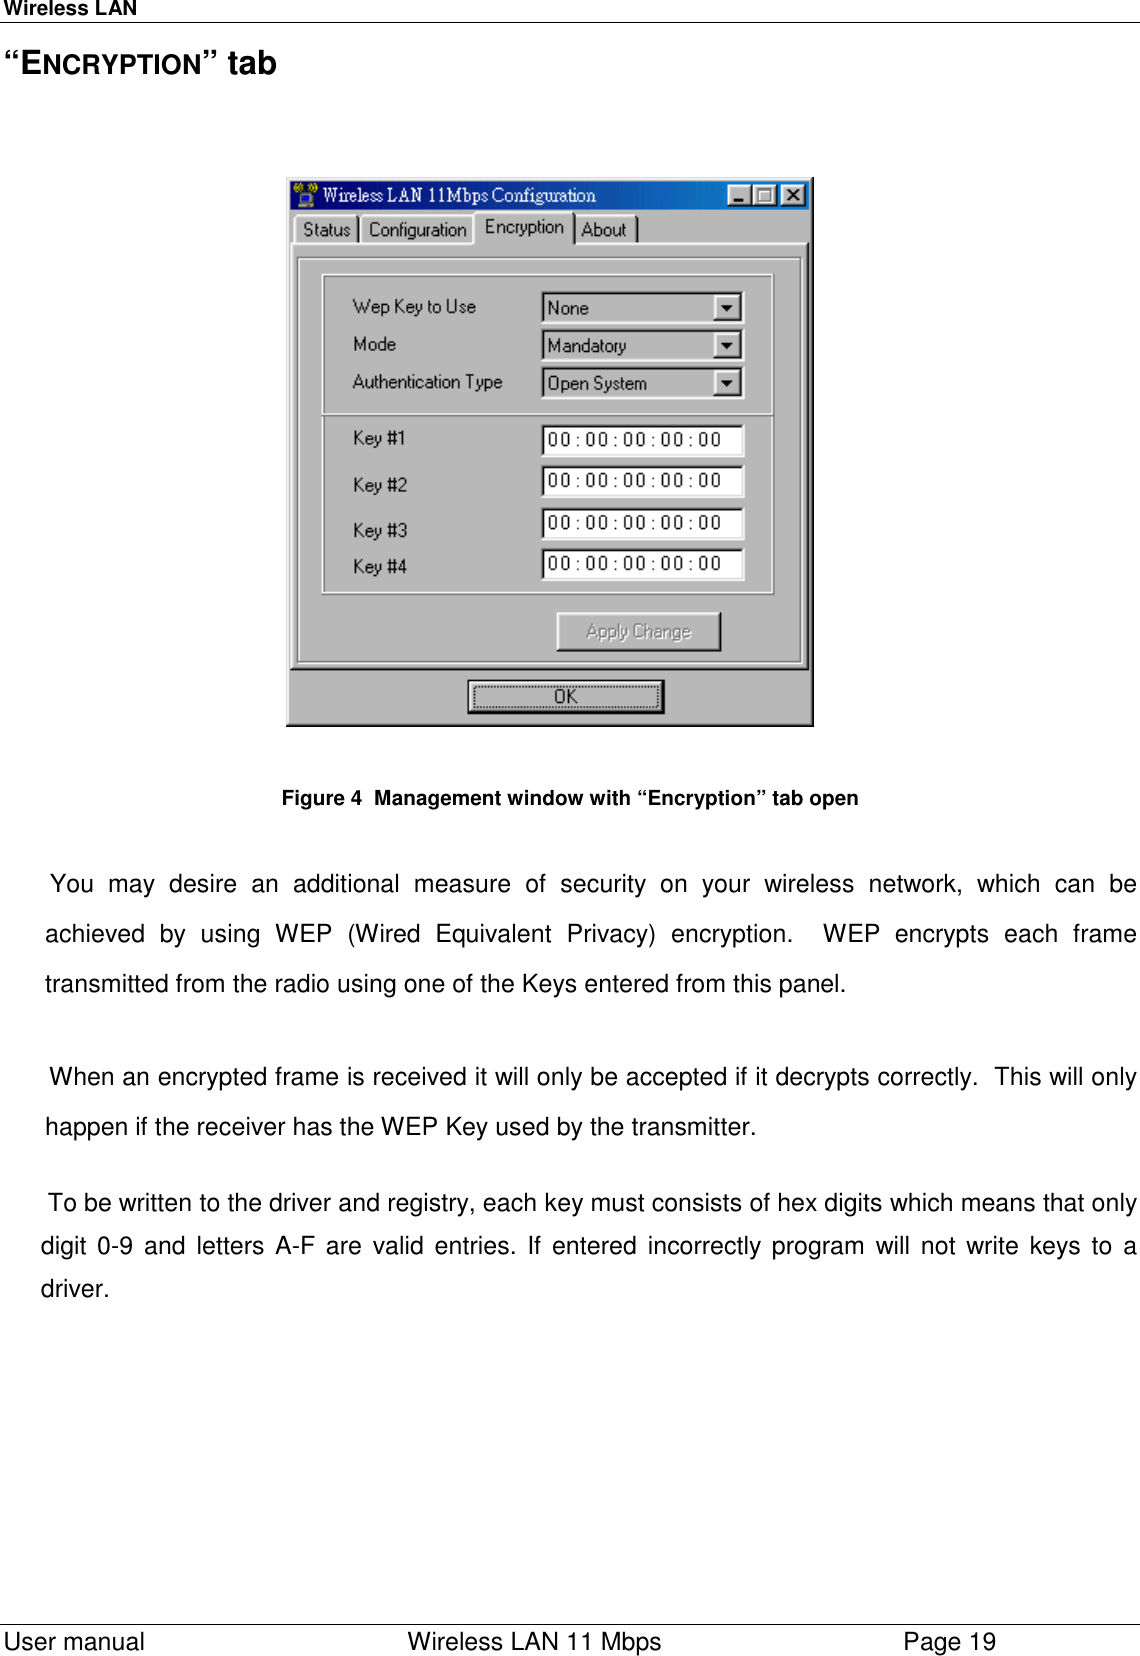 Wireless LAN  User manual    Wireless LAN 11 Mbps Page 19“ENCRYPTION” tab                                                                                                                        Figure 4  Management window with “Encryption” tab open You may desire an additional measure of security on your wireless network, which can beachieved by using WEP (Wired Equivalent Privacy) encryption.  WEP encrypts each frametransmitted from the radio using one of the Keys entered from this panel.When an encrypted frame is received it will only be accepted if it decrypts correctly.  This will onlyhappen if the receiver has the WEP Key used by the transmitter. To be written to the driver and registry, each key must consists of hex digits which means that onlydigit 0-9 and letters A-F are valid entries. If entered incorrectly program will not write keys to adriver.